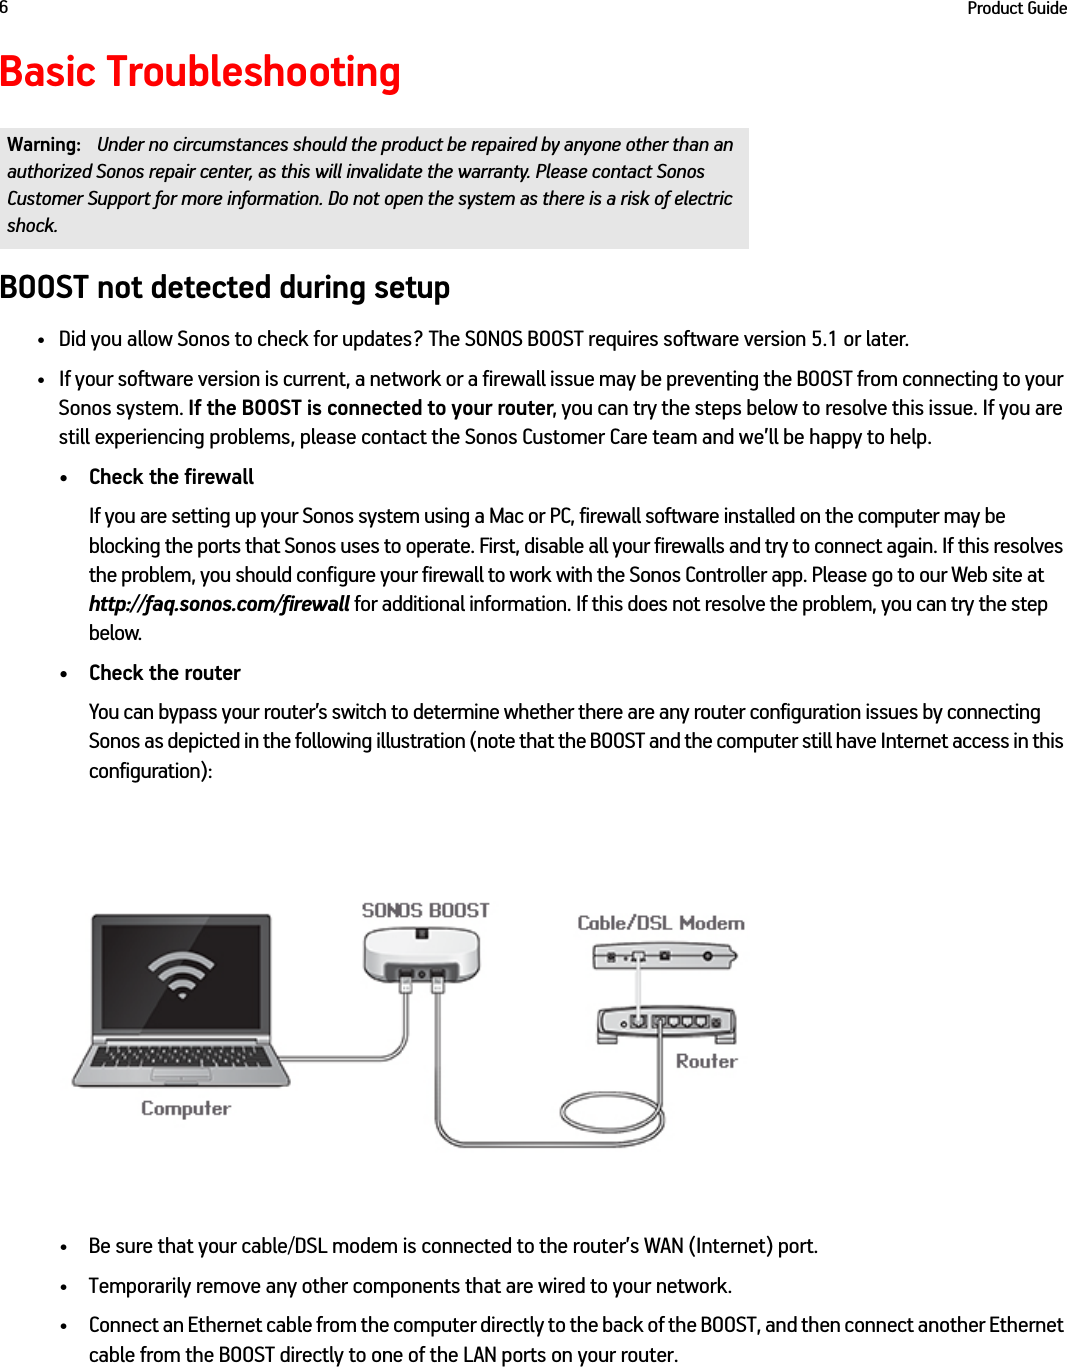 Product Guide6Basic TroubleshootingBOOST not detected during setup• Did you allow Sonos to check for updates? The SONOS BOOST requires software version 5.1 or later. • If your software version is current, a network or a firewall issue may be preventing the BOOST from connecting to your Sonos system. If the BOOST is connected to your router, you can try the steps below to resolve this issue. If you are still experiencing problems, please contact the Sonos Customer Care team and we’ll be happy to help.• Check the firewallIf you are setting up your Sonos system using a Mac or PC, firewall software installed on the computer may be blocking the ports that Sonos uses to operate. First, disable all your firewalls and try to connect again. If this resolves the problem, you should configure your firewall to work with the Sonos Controller app. Please go to our Web site at http://faq.sonos.com/firewall for additional information. If this does not resolve the problem, you can try the step below.• Check the routerYou can bypass your router’s switch to determine whether there are any router configuration issues by connecting Sonos as depicted in the following illustration (note that the BOOST and the computer still have Internet access in this configuration):• Be sure that your cable/DSL modem is connected to the router’s WAN (Internet) port. • Temporarily remove any other components that are wired to your network. • Connect an Ethernet cable from the computer directly to the back of the BOOST, and then connect another Ethernet cable from the BOOST directly to one of the LAN ports on your router. Warning: Under no circumstances should the product be repaired by anyone other than an authorized Sonos repair center, as this will invalidate the warranty. Please contact Sonos Customer Support for more information. Do not open the system as there is a risk of electric shock. 